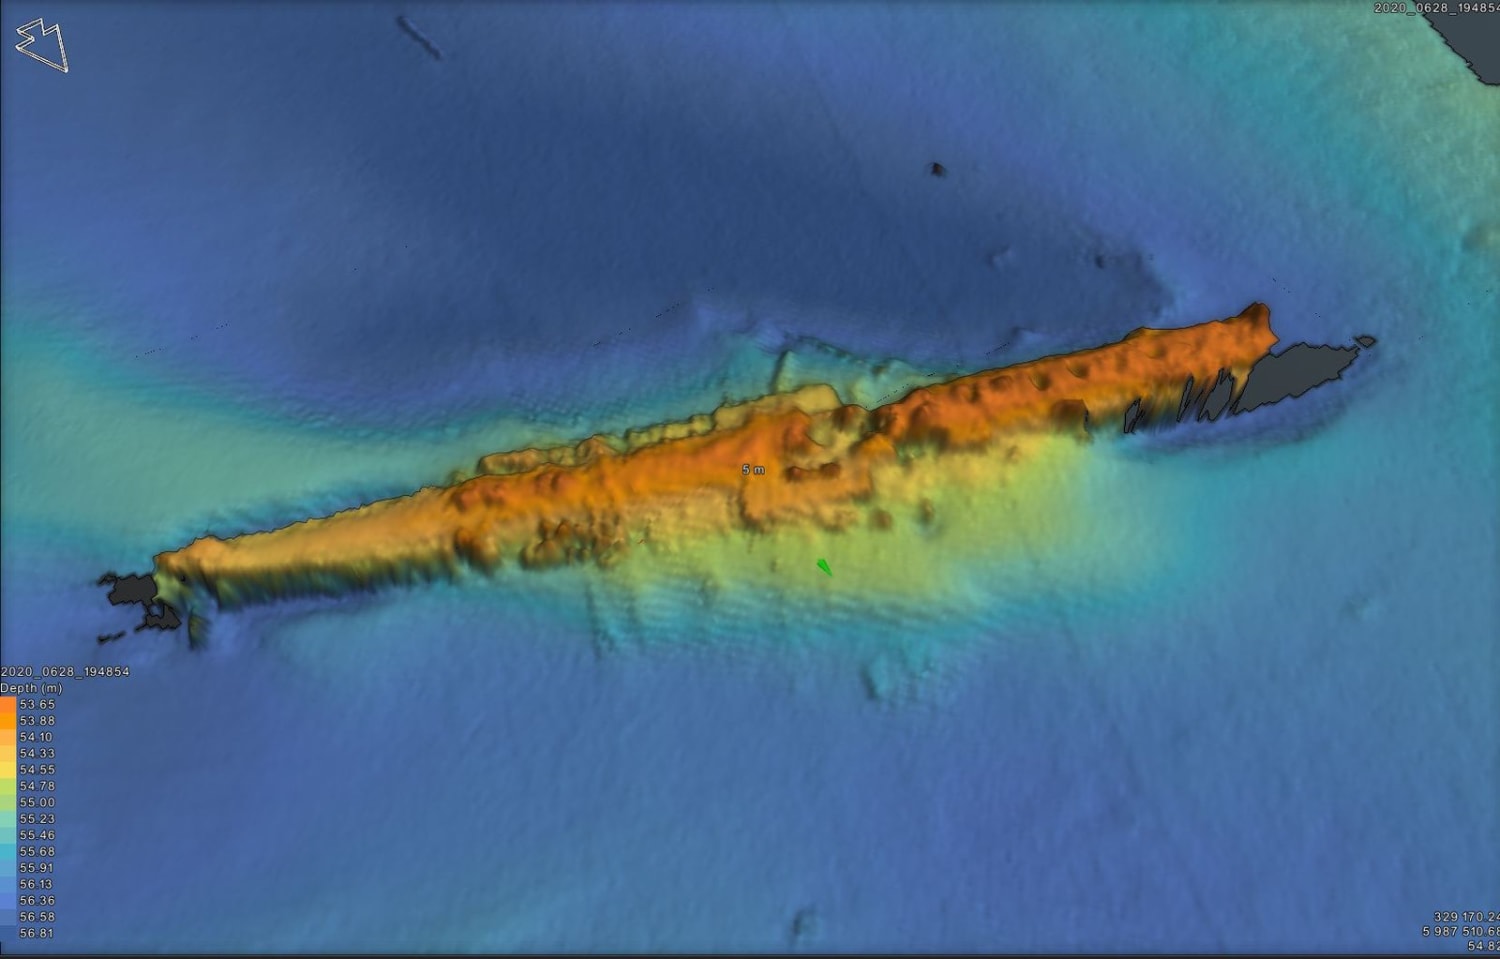 Wreck of U-Boat Sunk Off English Coast During WWI Explored for the First Time